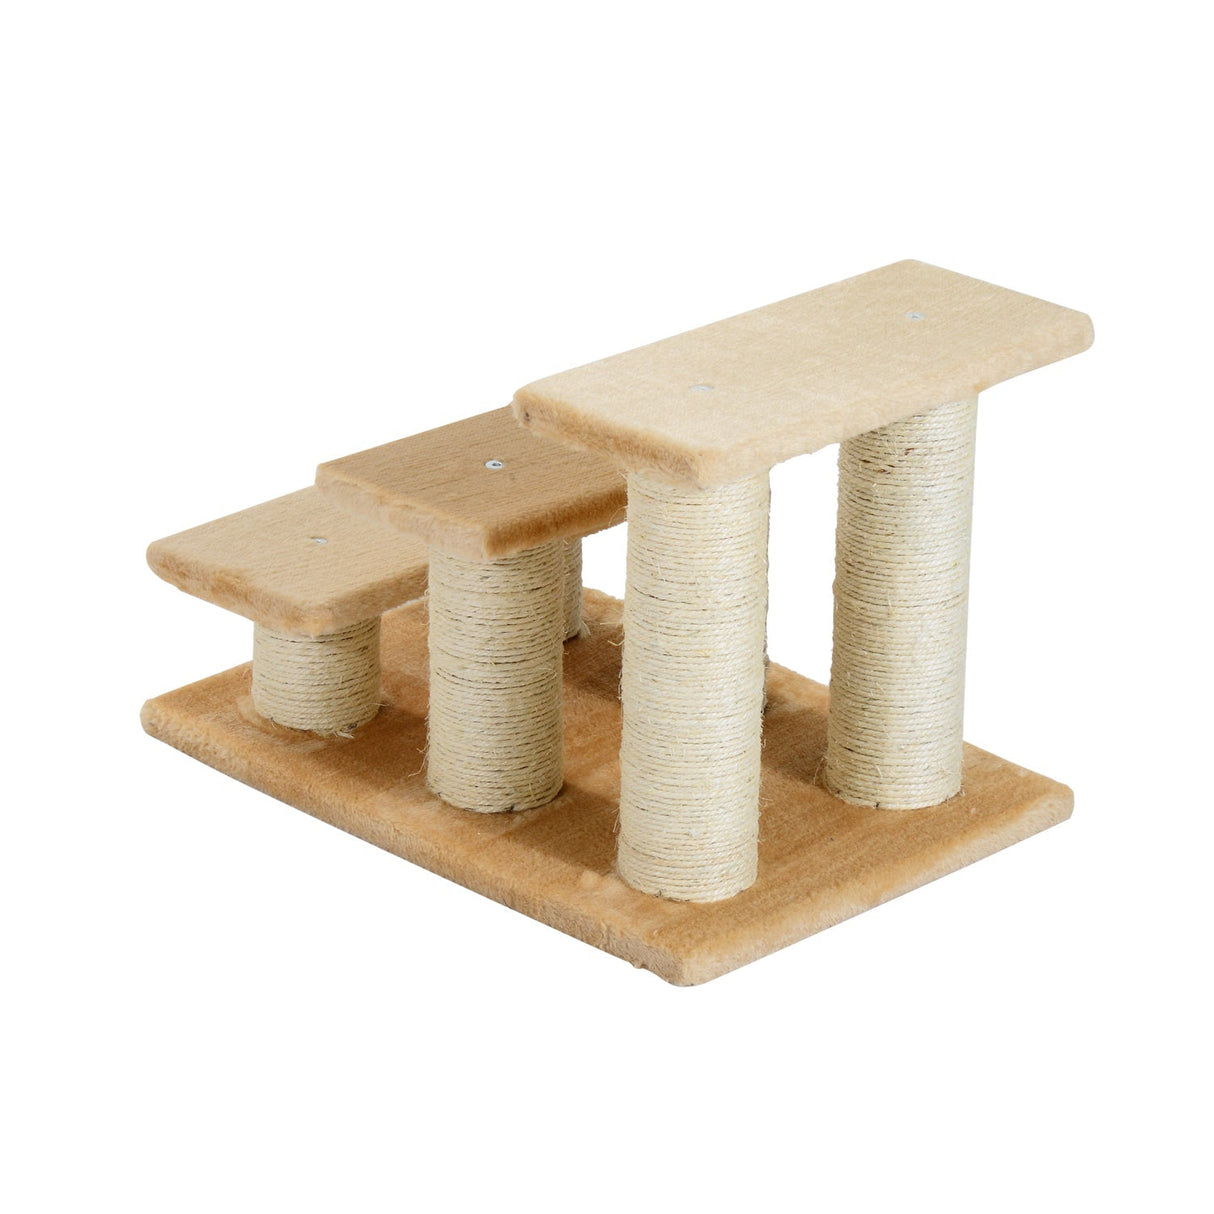 Cats 3-Tier Particle Board Stair Scratch Tree Beige, PawHut,